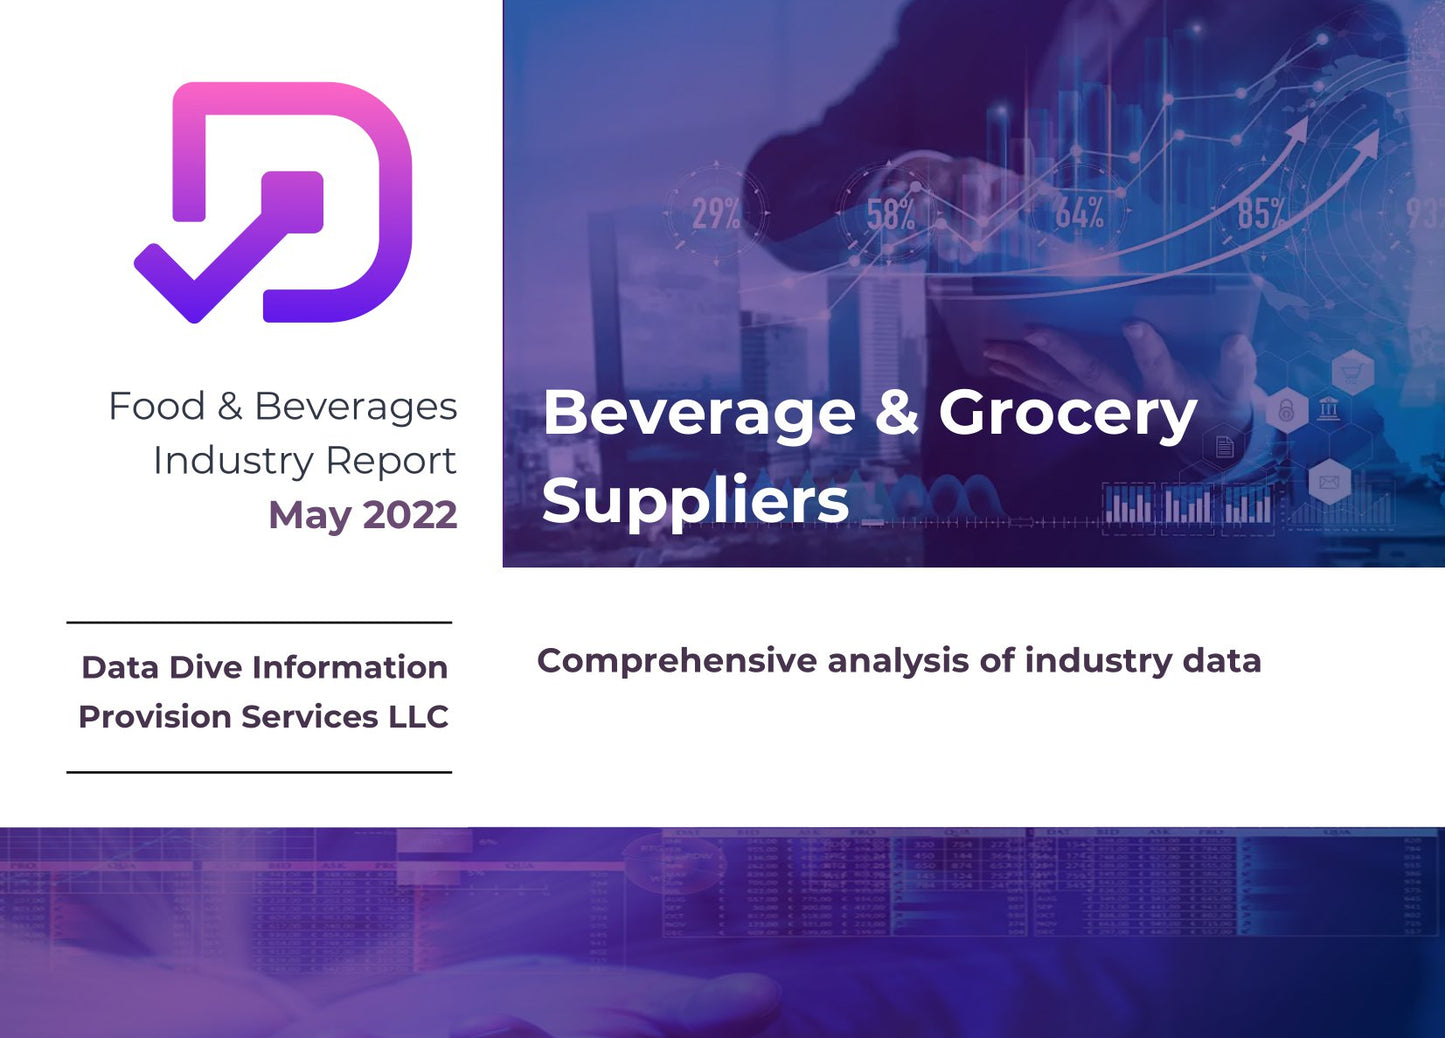 Beverage & Grocery Suppliers